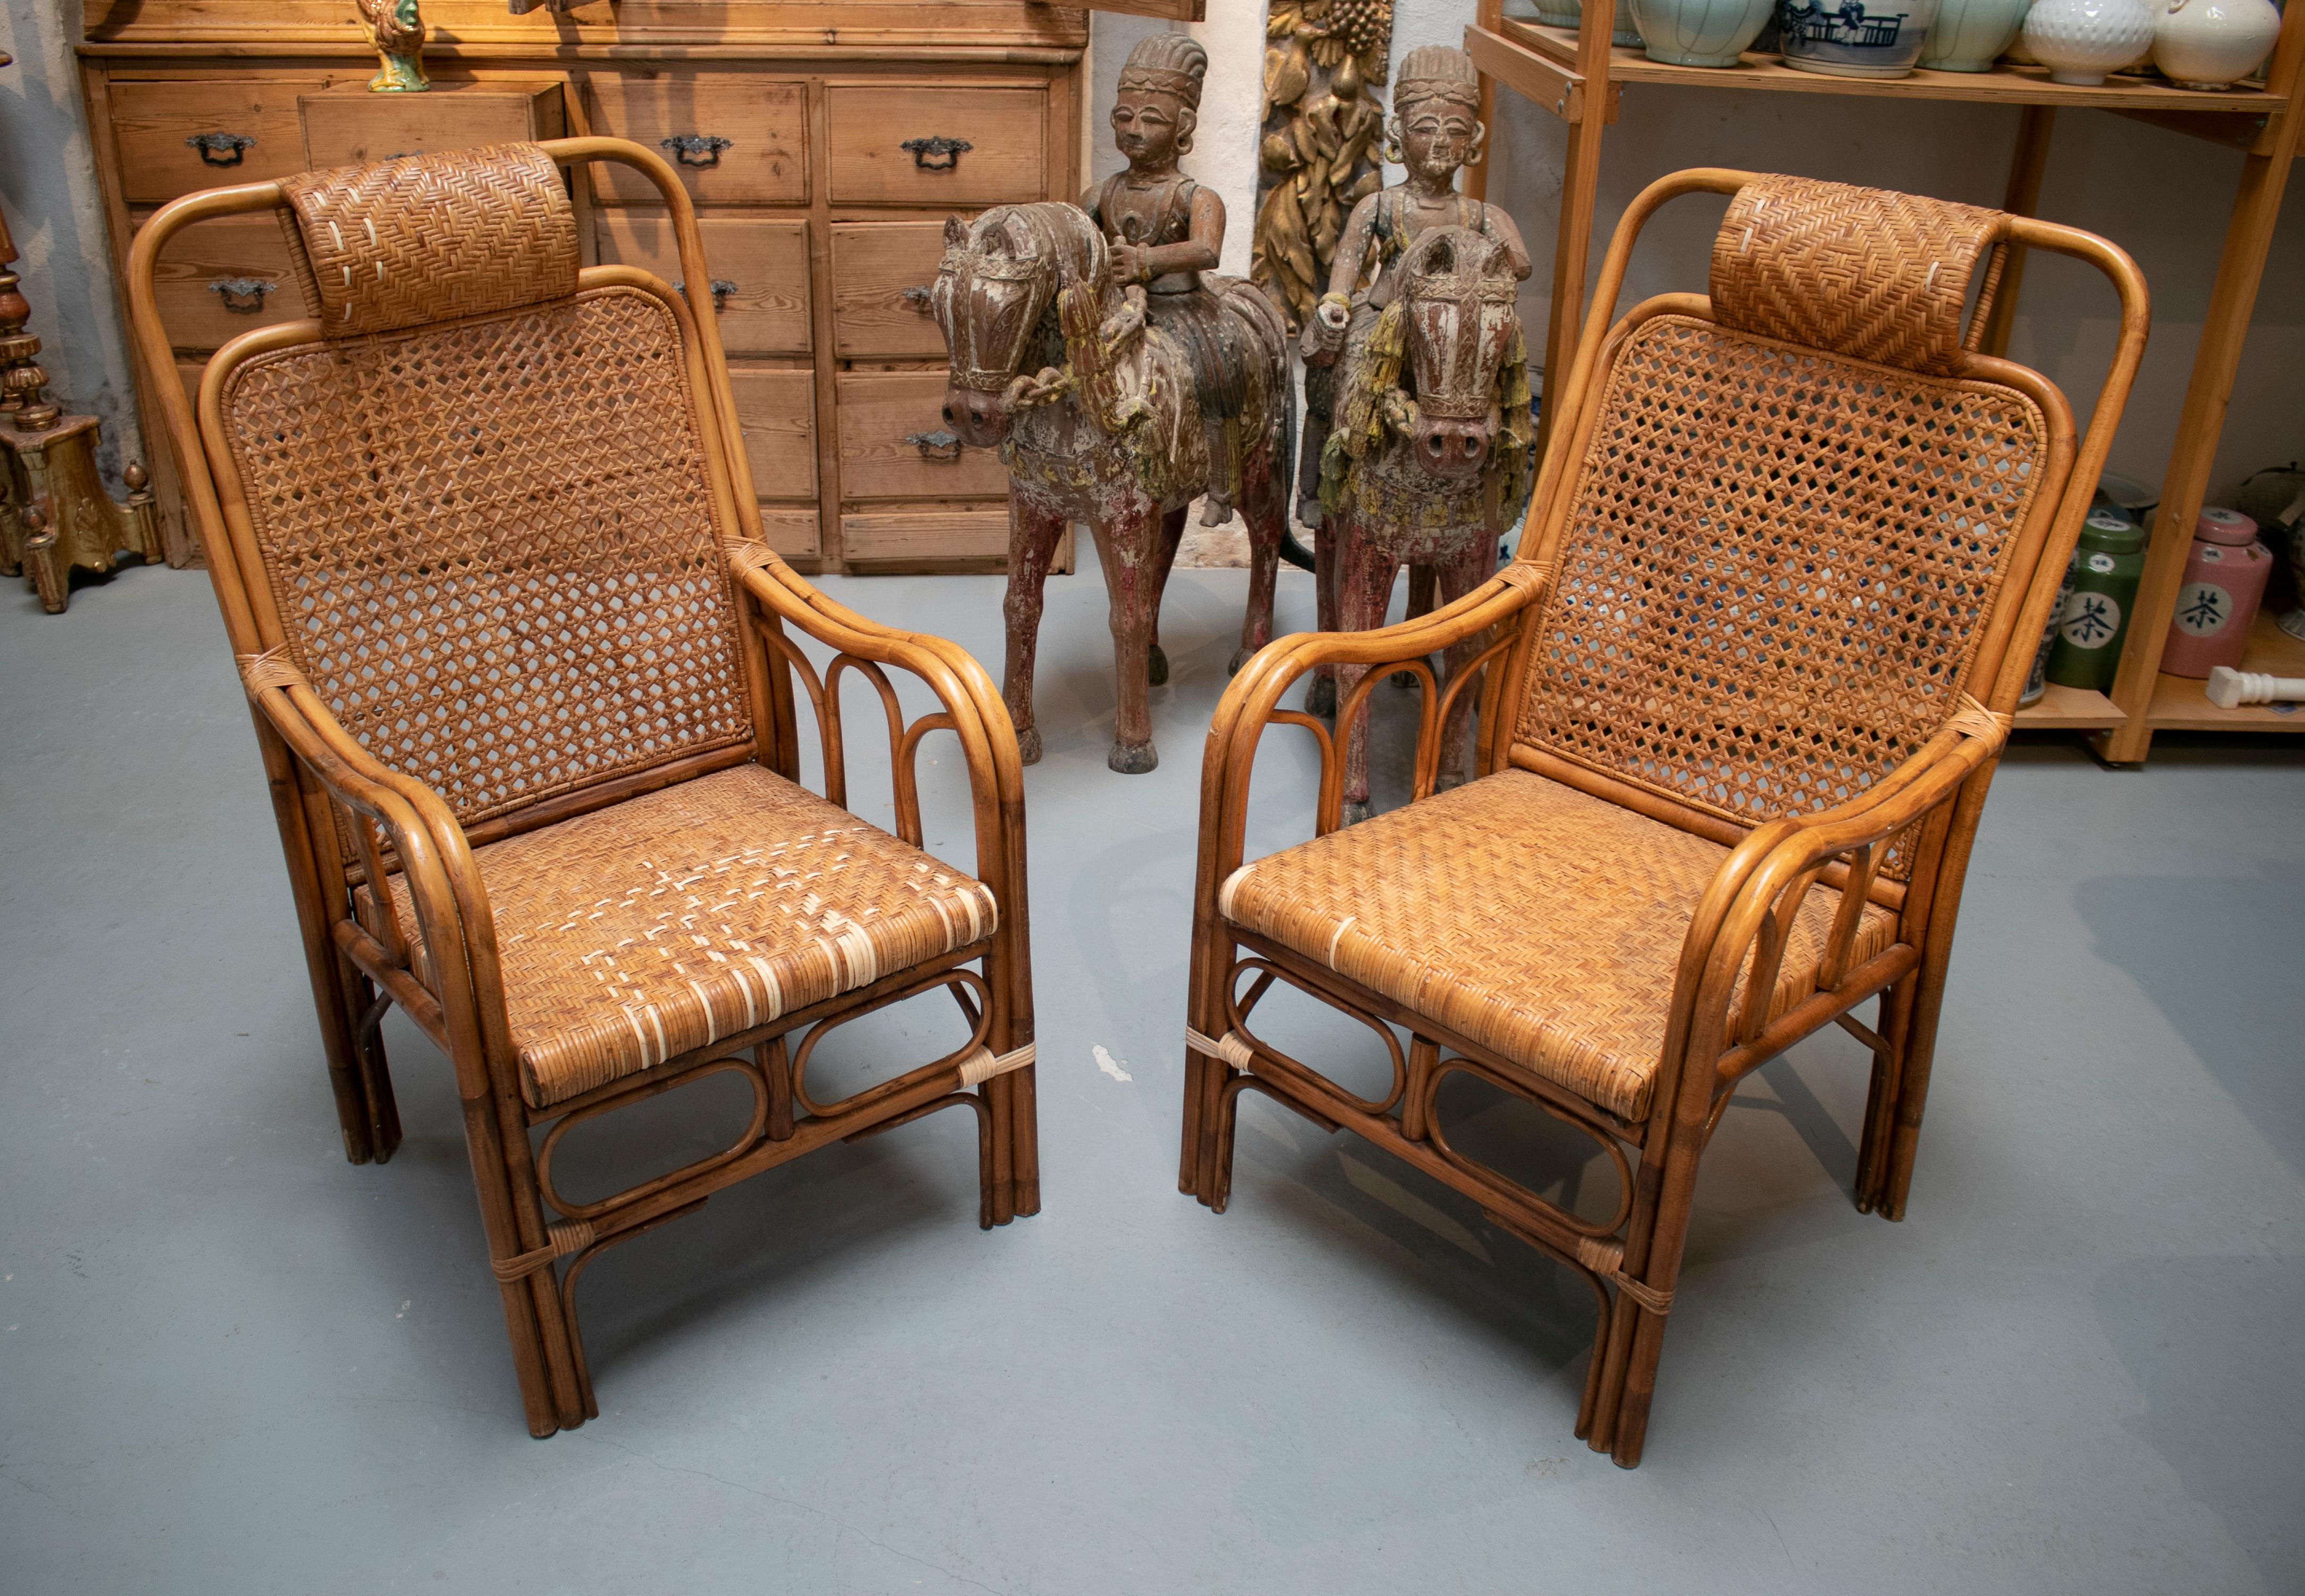 Vintage 1950s pair of Spanish hand woven wicker armchairs.